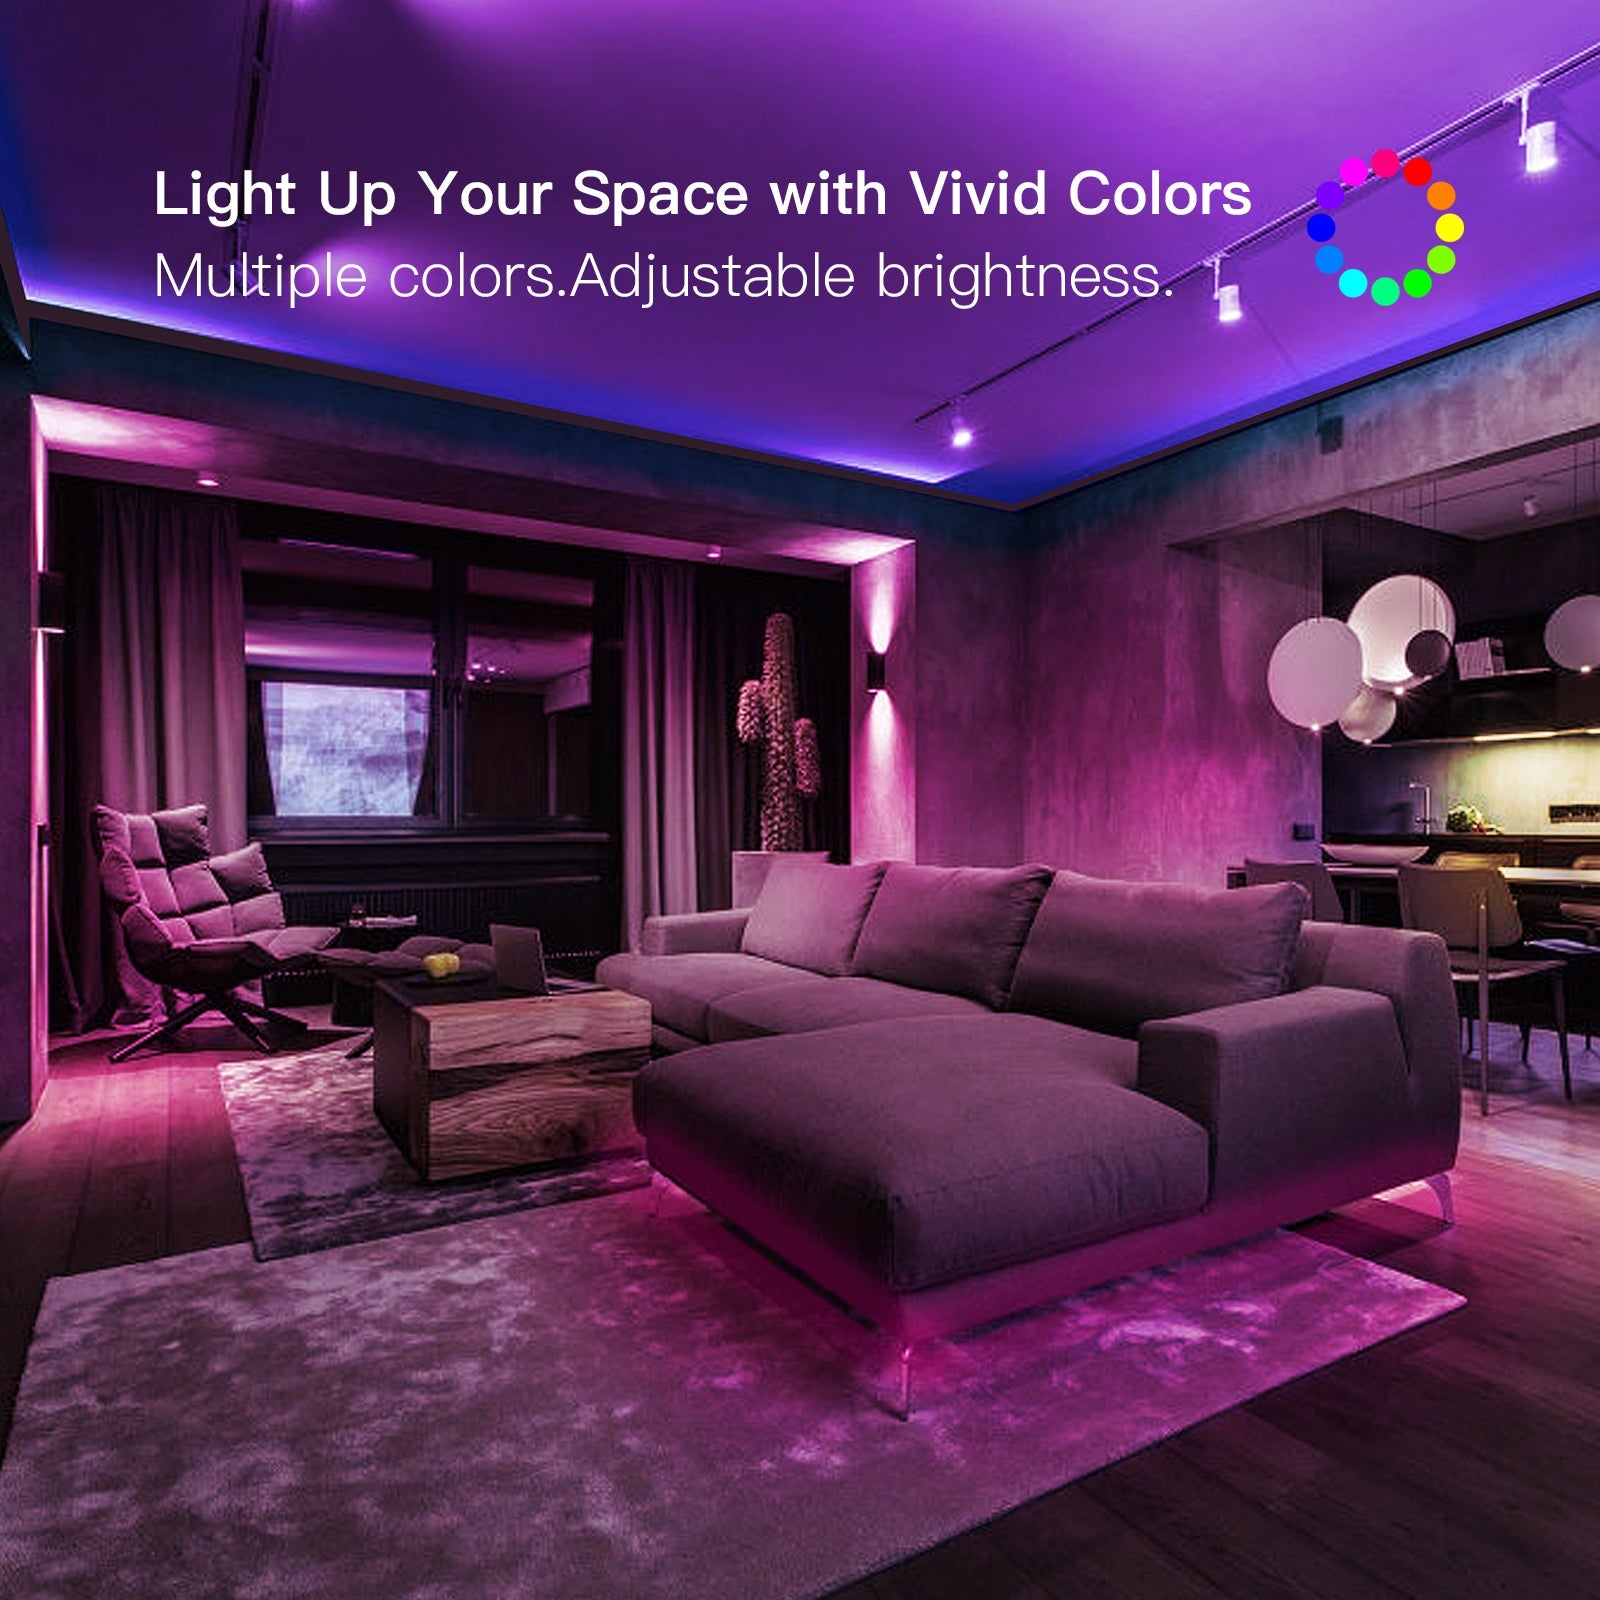 Light Up Your Festive Season With 38% Off Govee LED Strip Lights